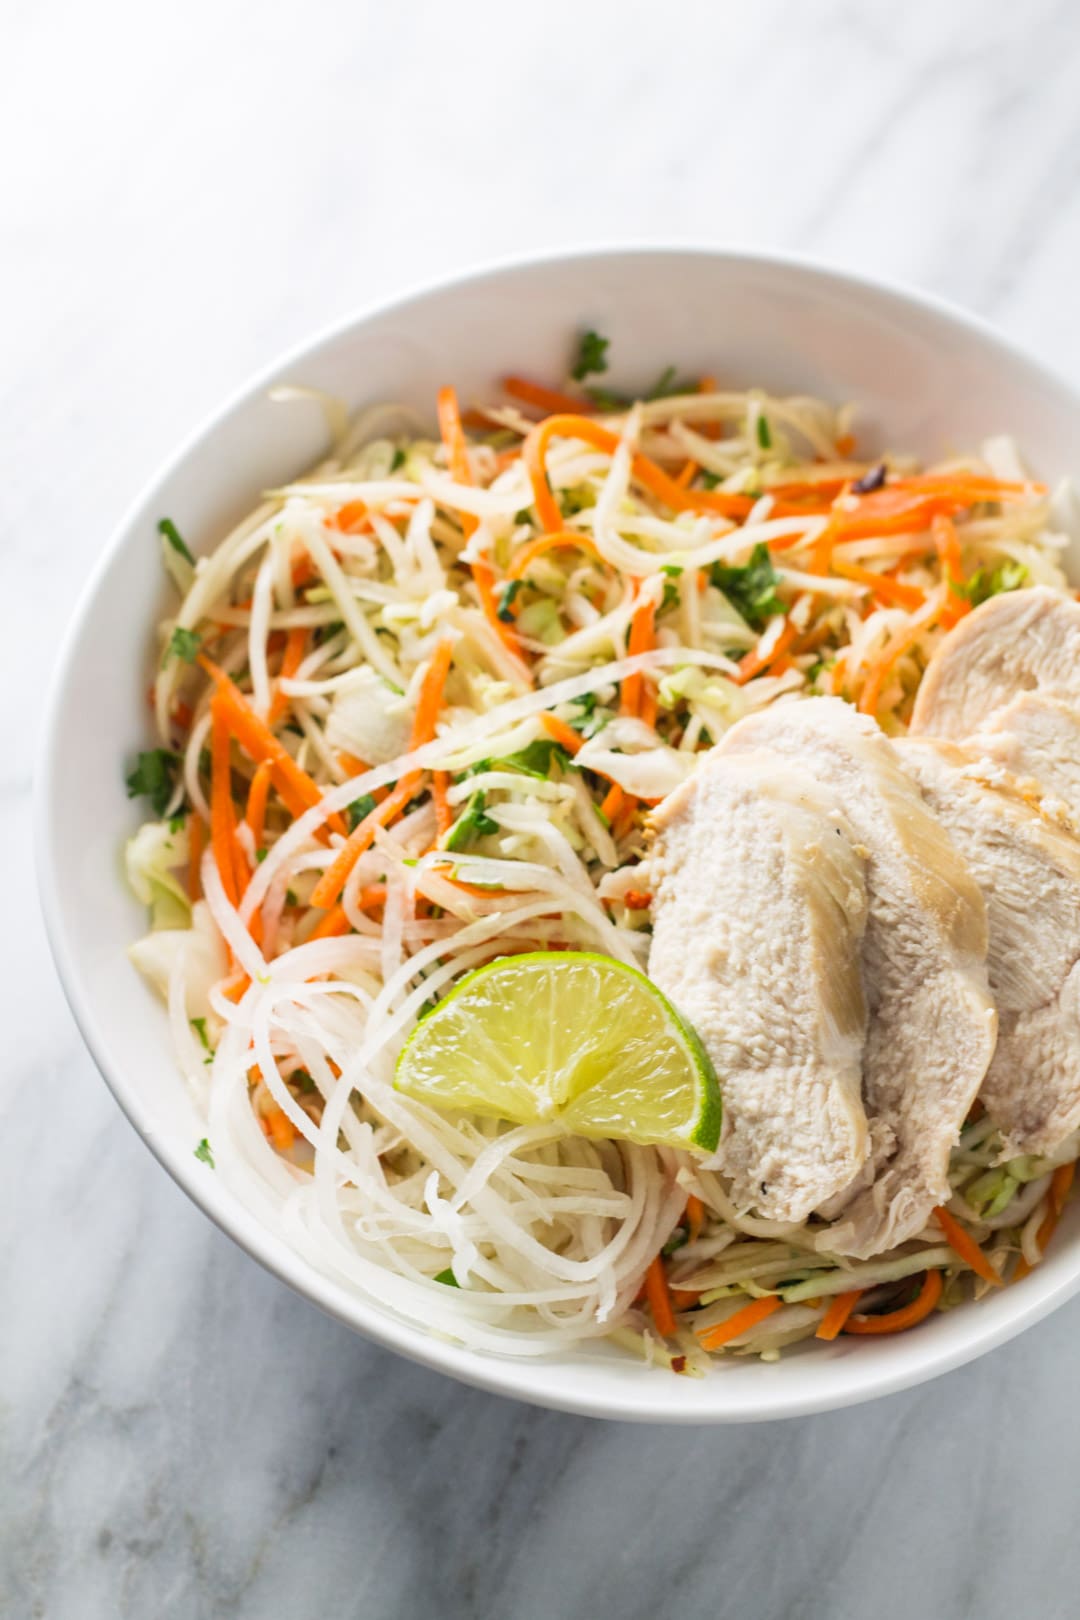 Bowl of low FODMAP Thai citrus salad topped with chicken and a lime wedge